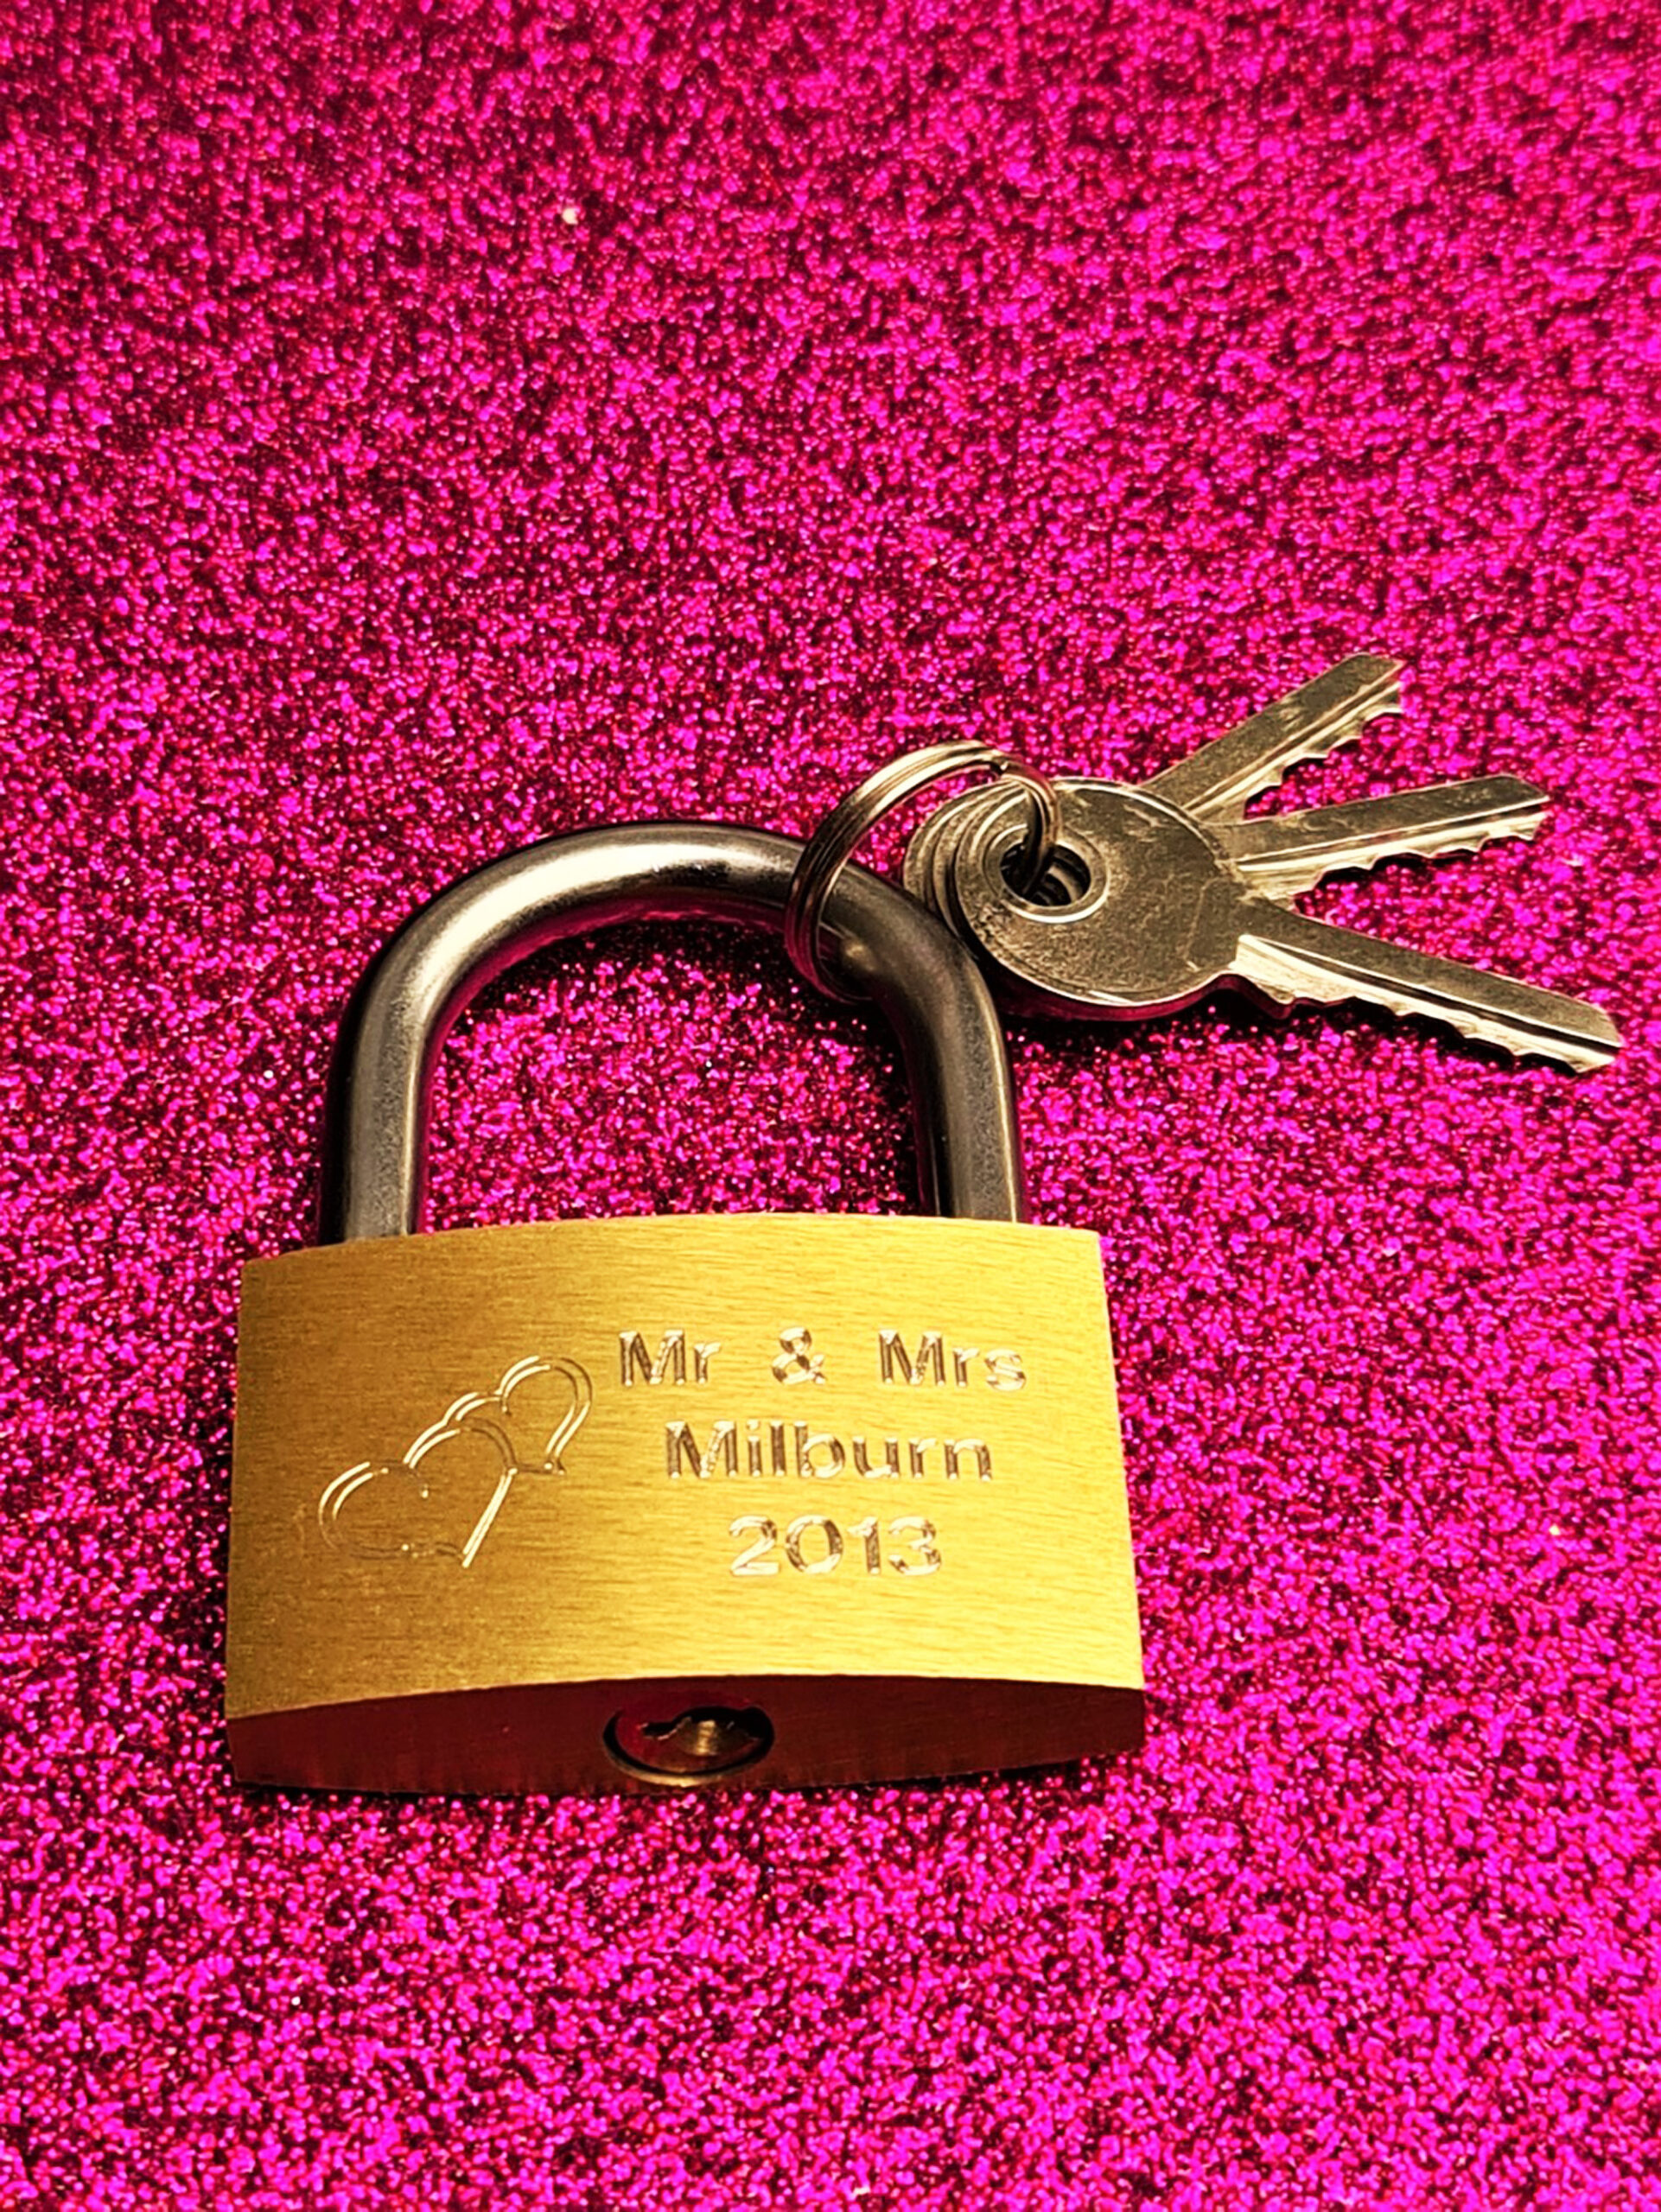 Present Love Lock Personalised Engraved Padlock Comes in Free Gift Box Wedding Annivesary Gift 